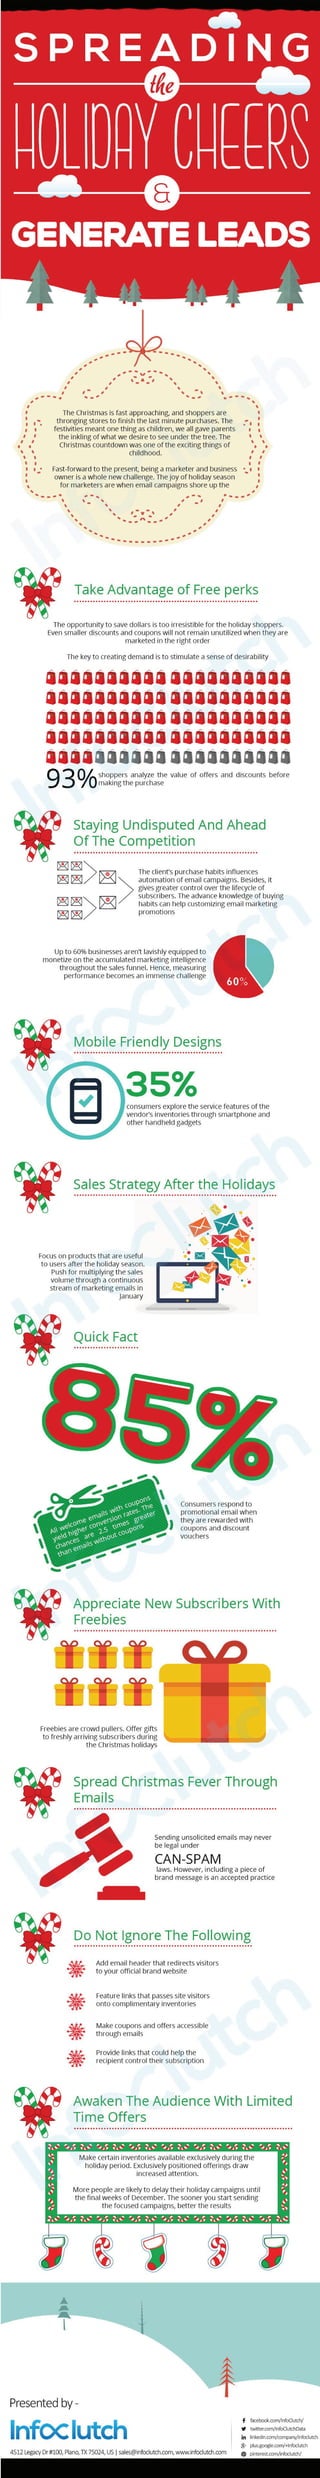 Spreading The Holiday Cheers And Generating Leads [Infographic]